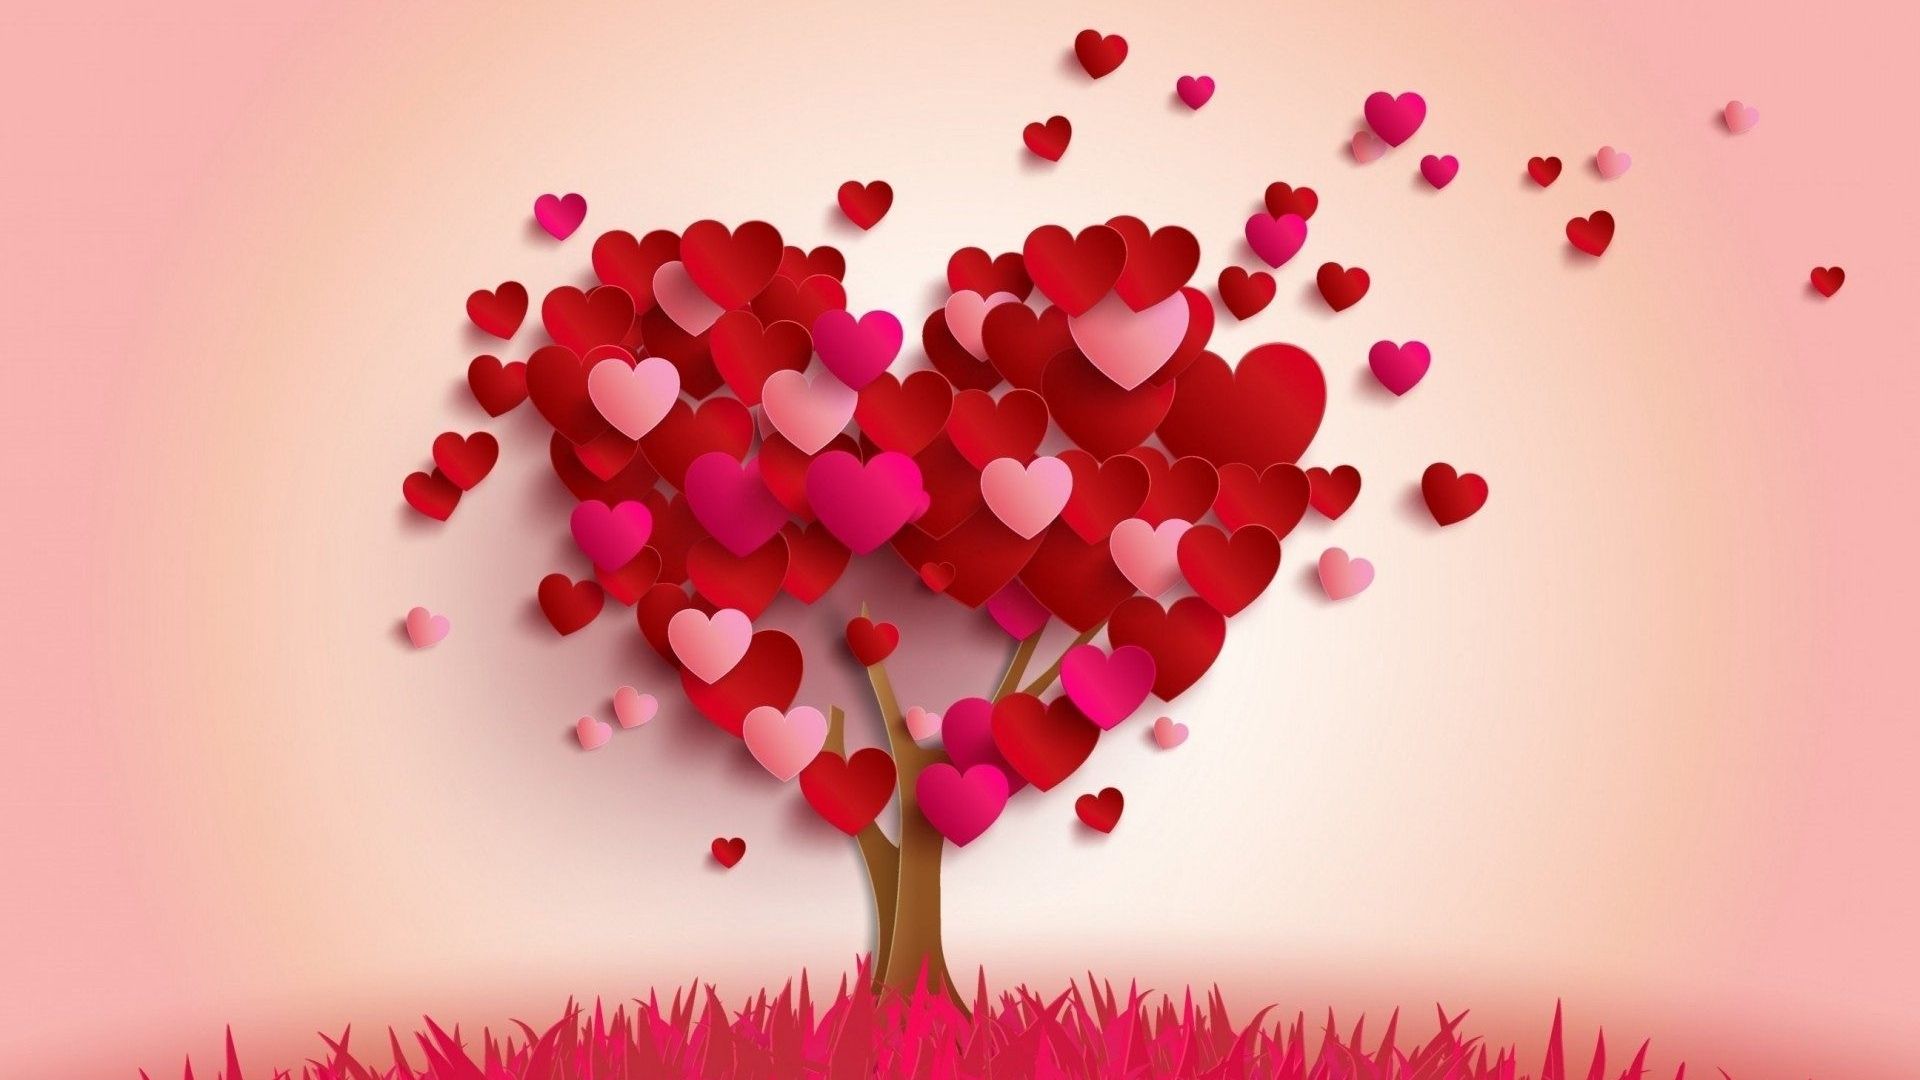 Heart Tree Images Wallpapers